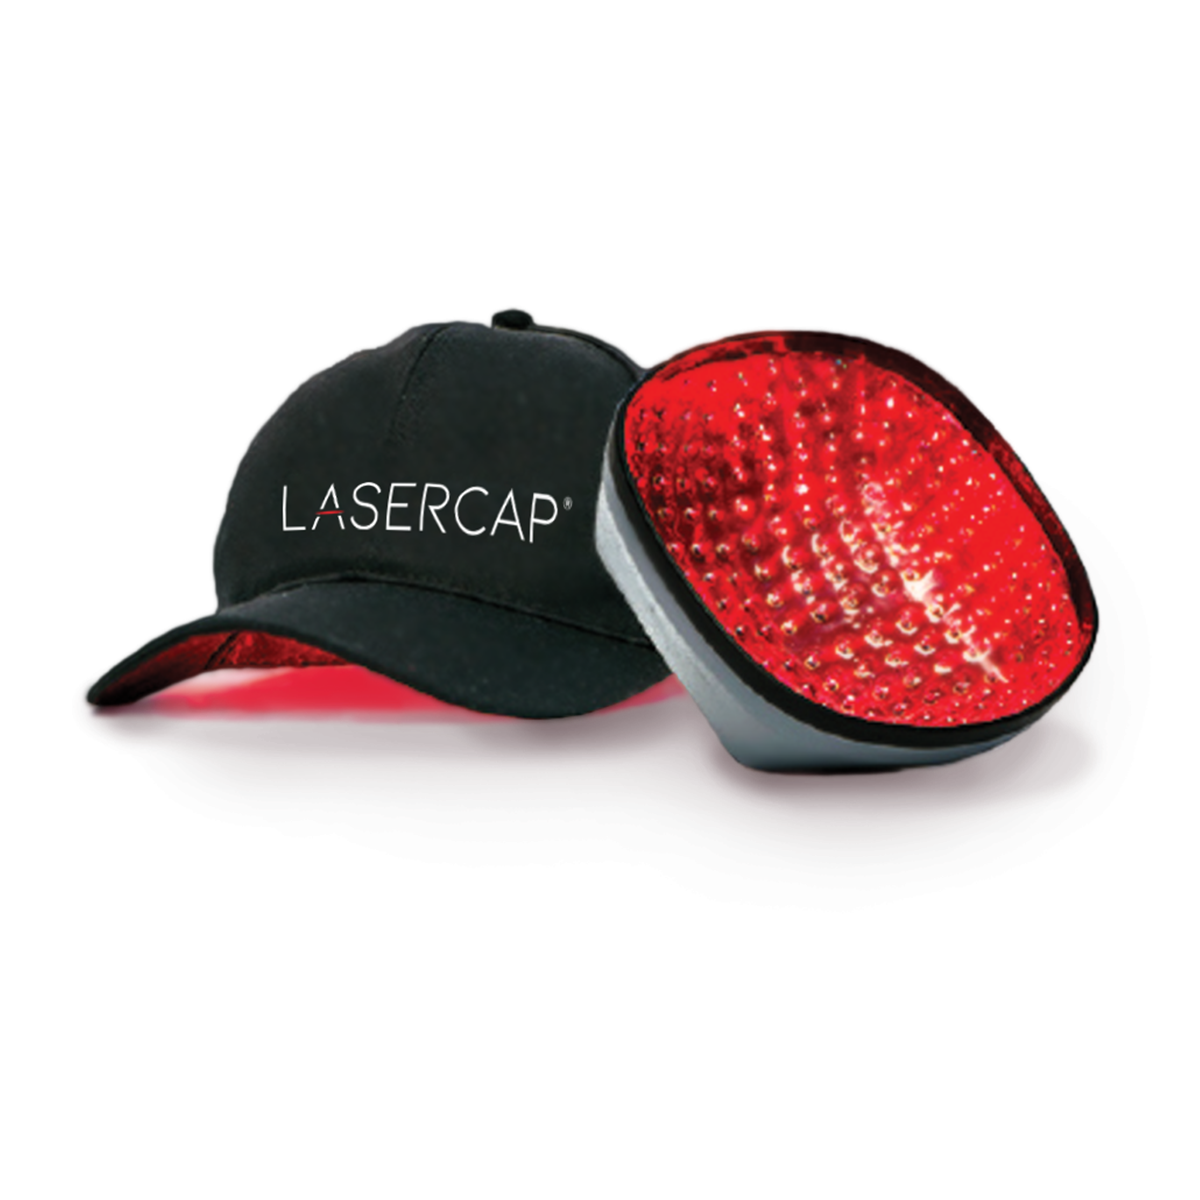 LaserCap HD+ - Professional Cap with 304 Laser Diodes. Best for Large Hair Loss Areas